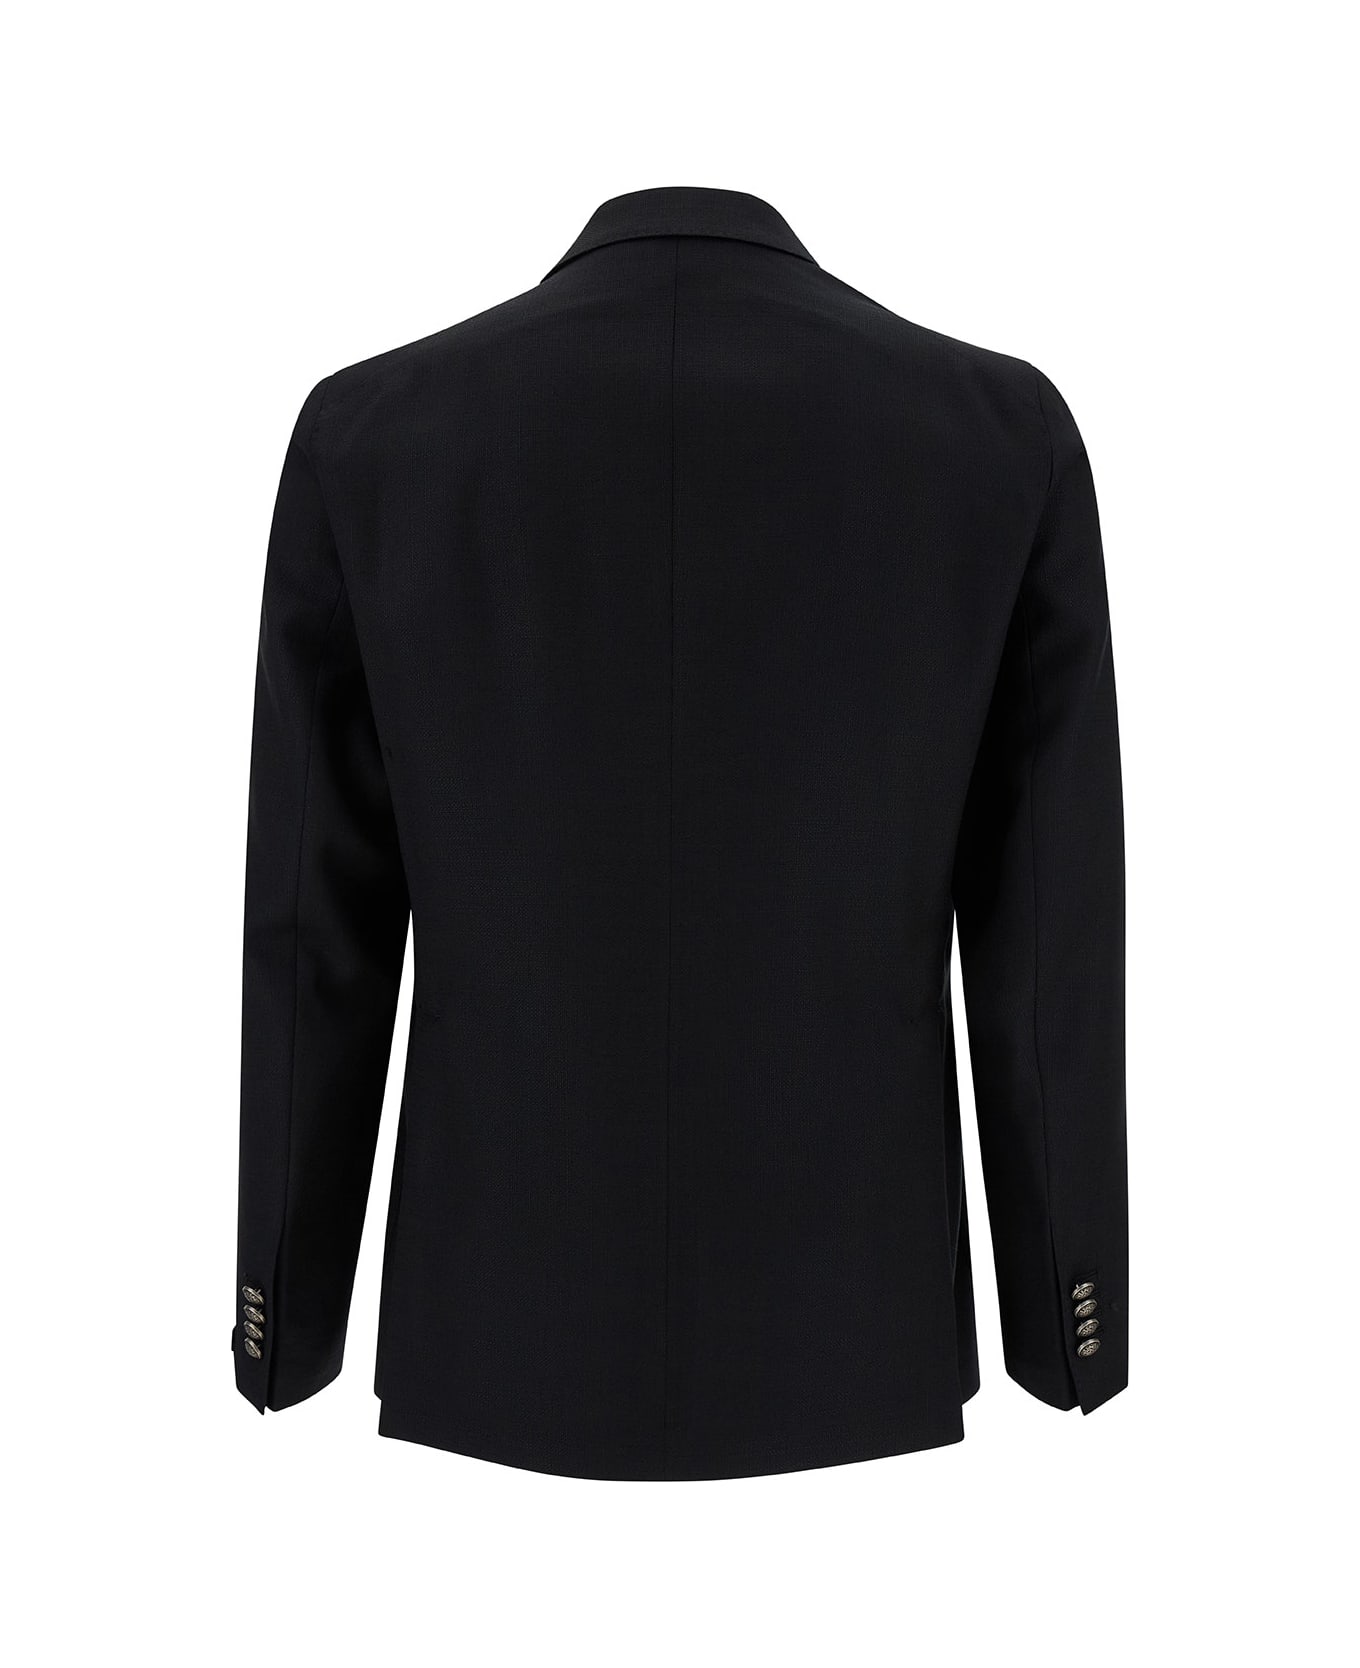 Tagliatore 'montecarlo' Black Double-breasted Jacket With Silver-colored Buttons In Wool Man - Black ブレザー